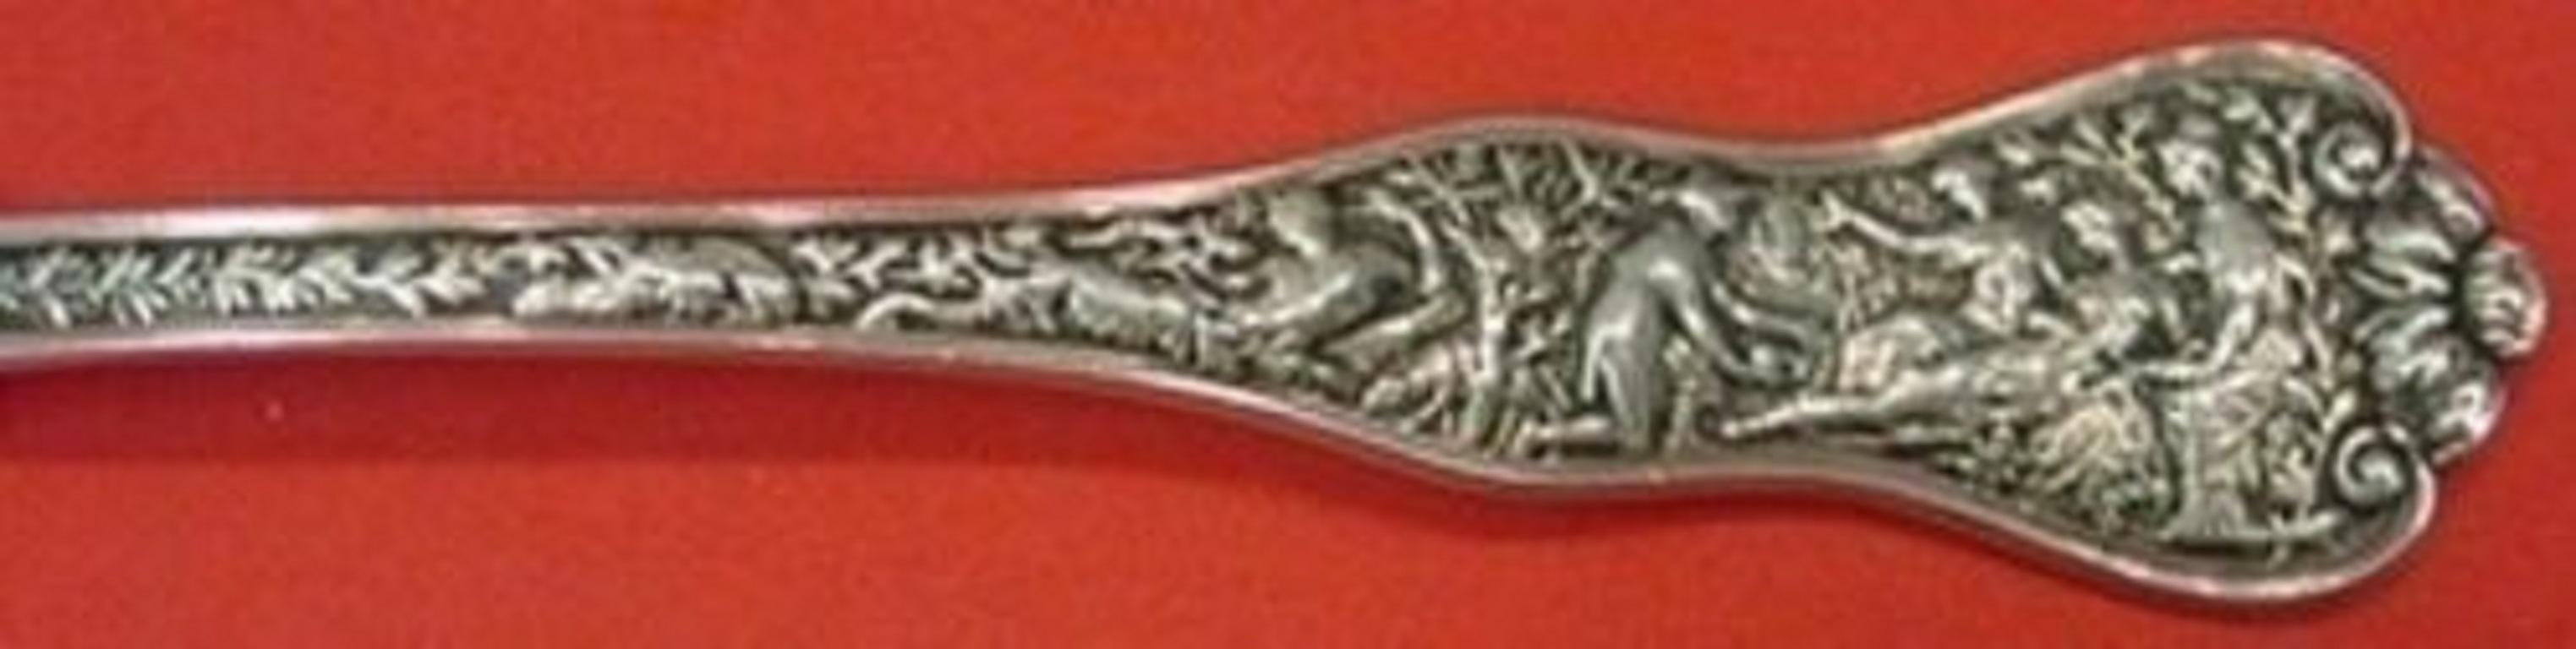 Olympian by Tiffany & Co Sterling Silver Serving Spoon 1